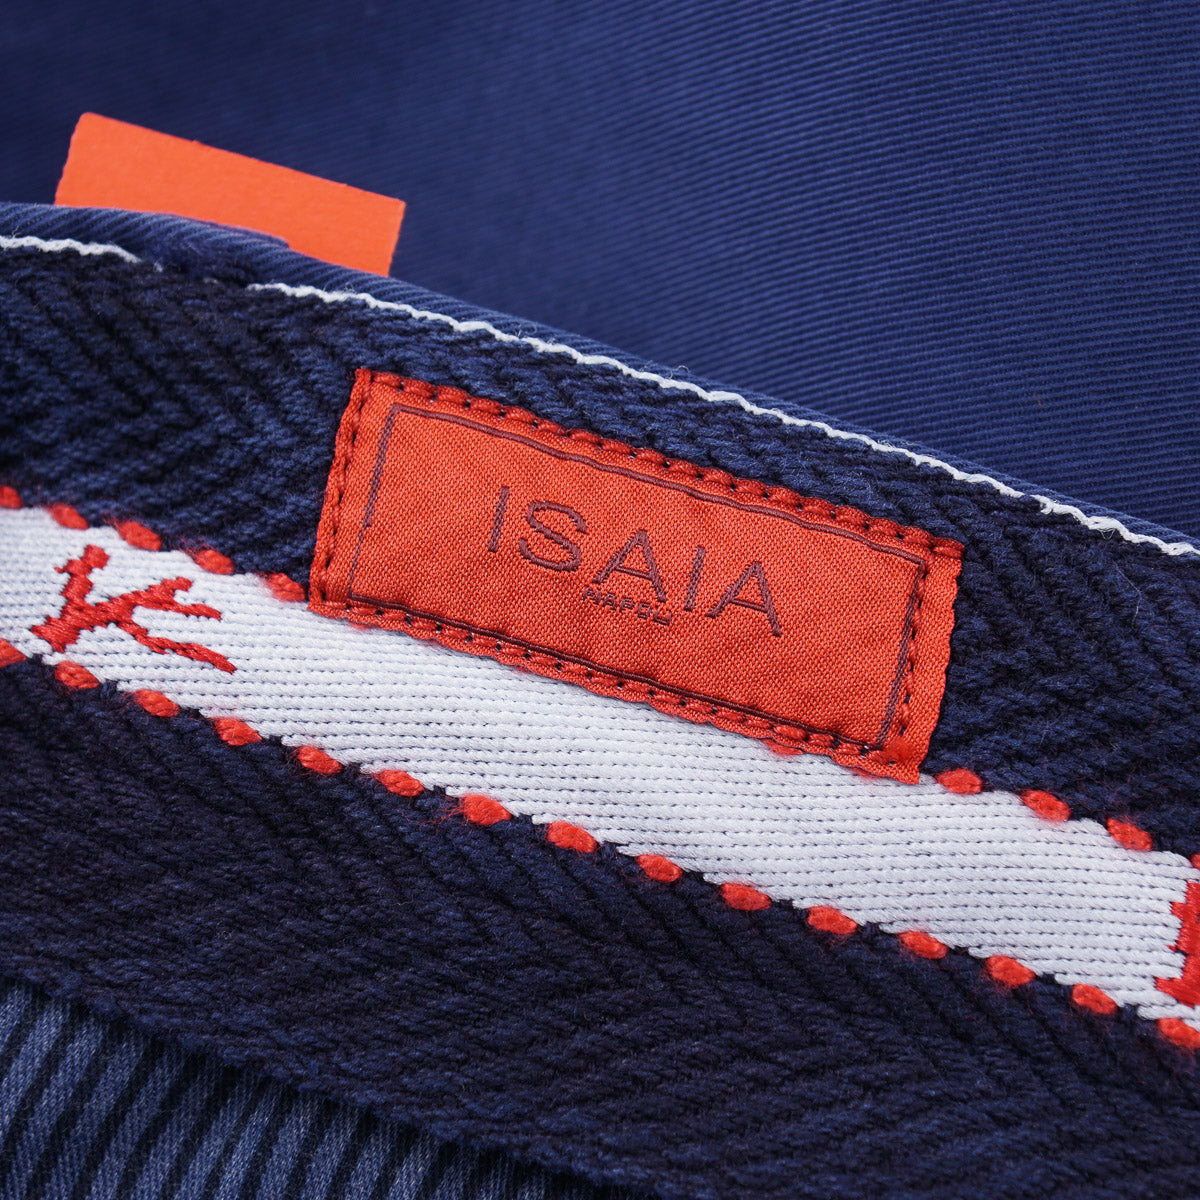 Isaia Slim-Fit Washed Cotton Chinos - Top Shelf Apparel